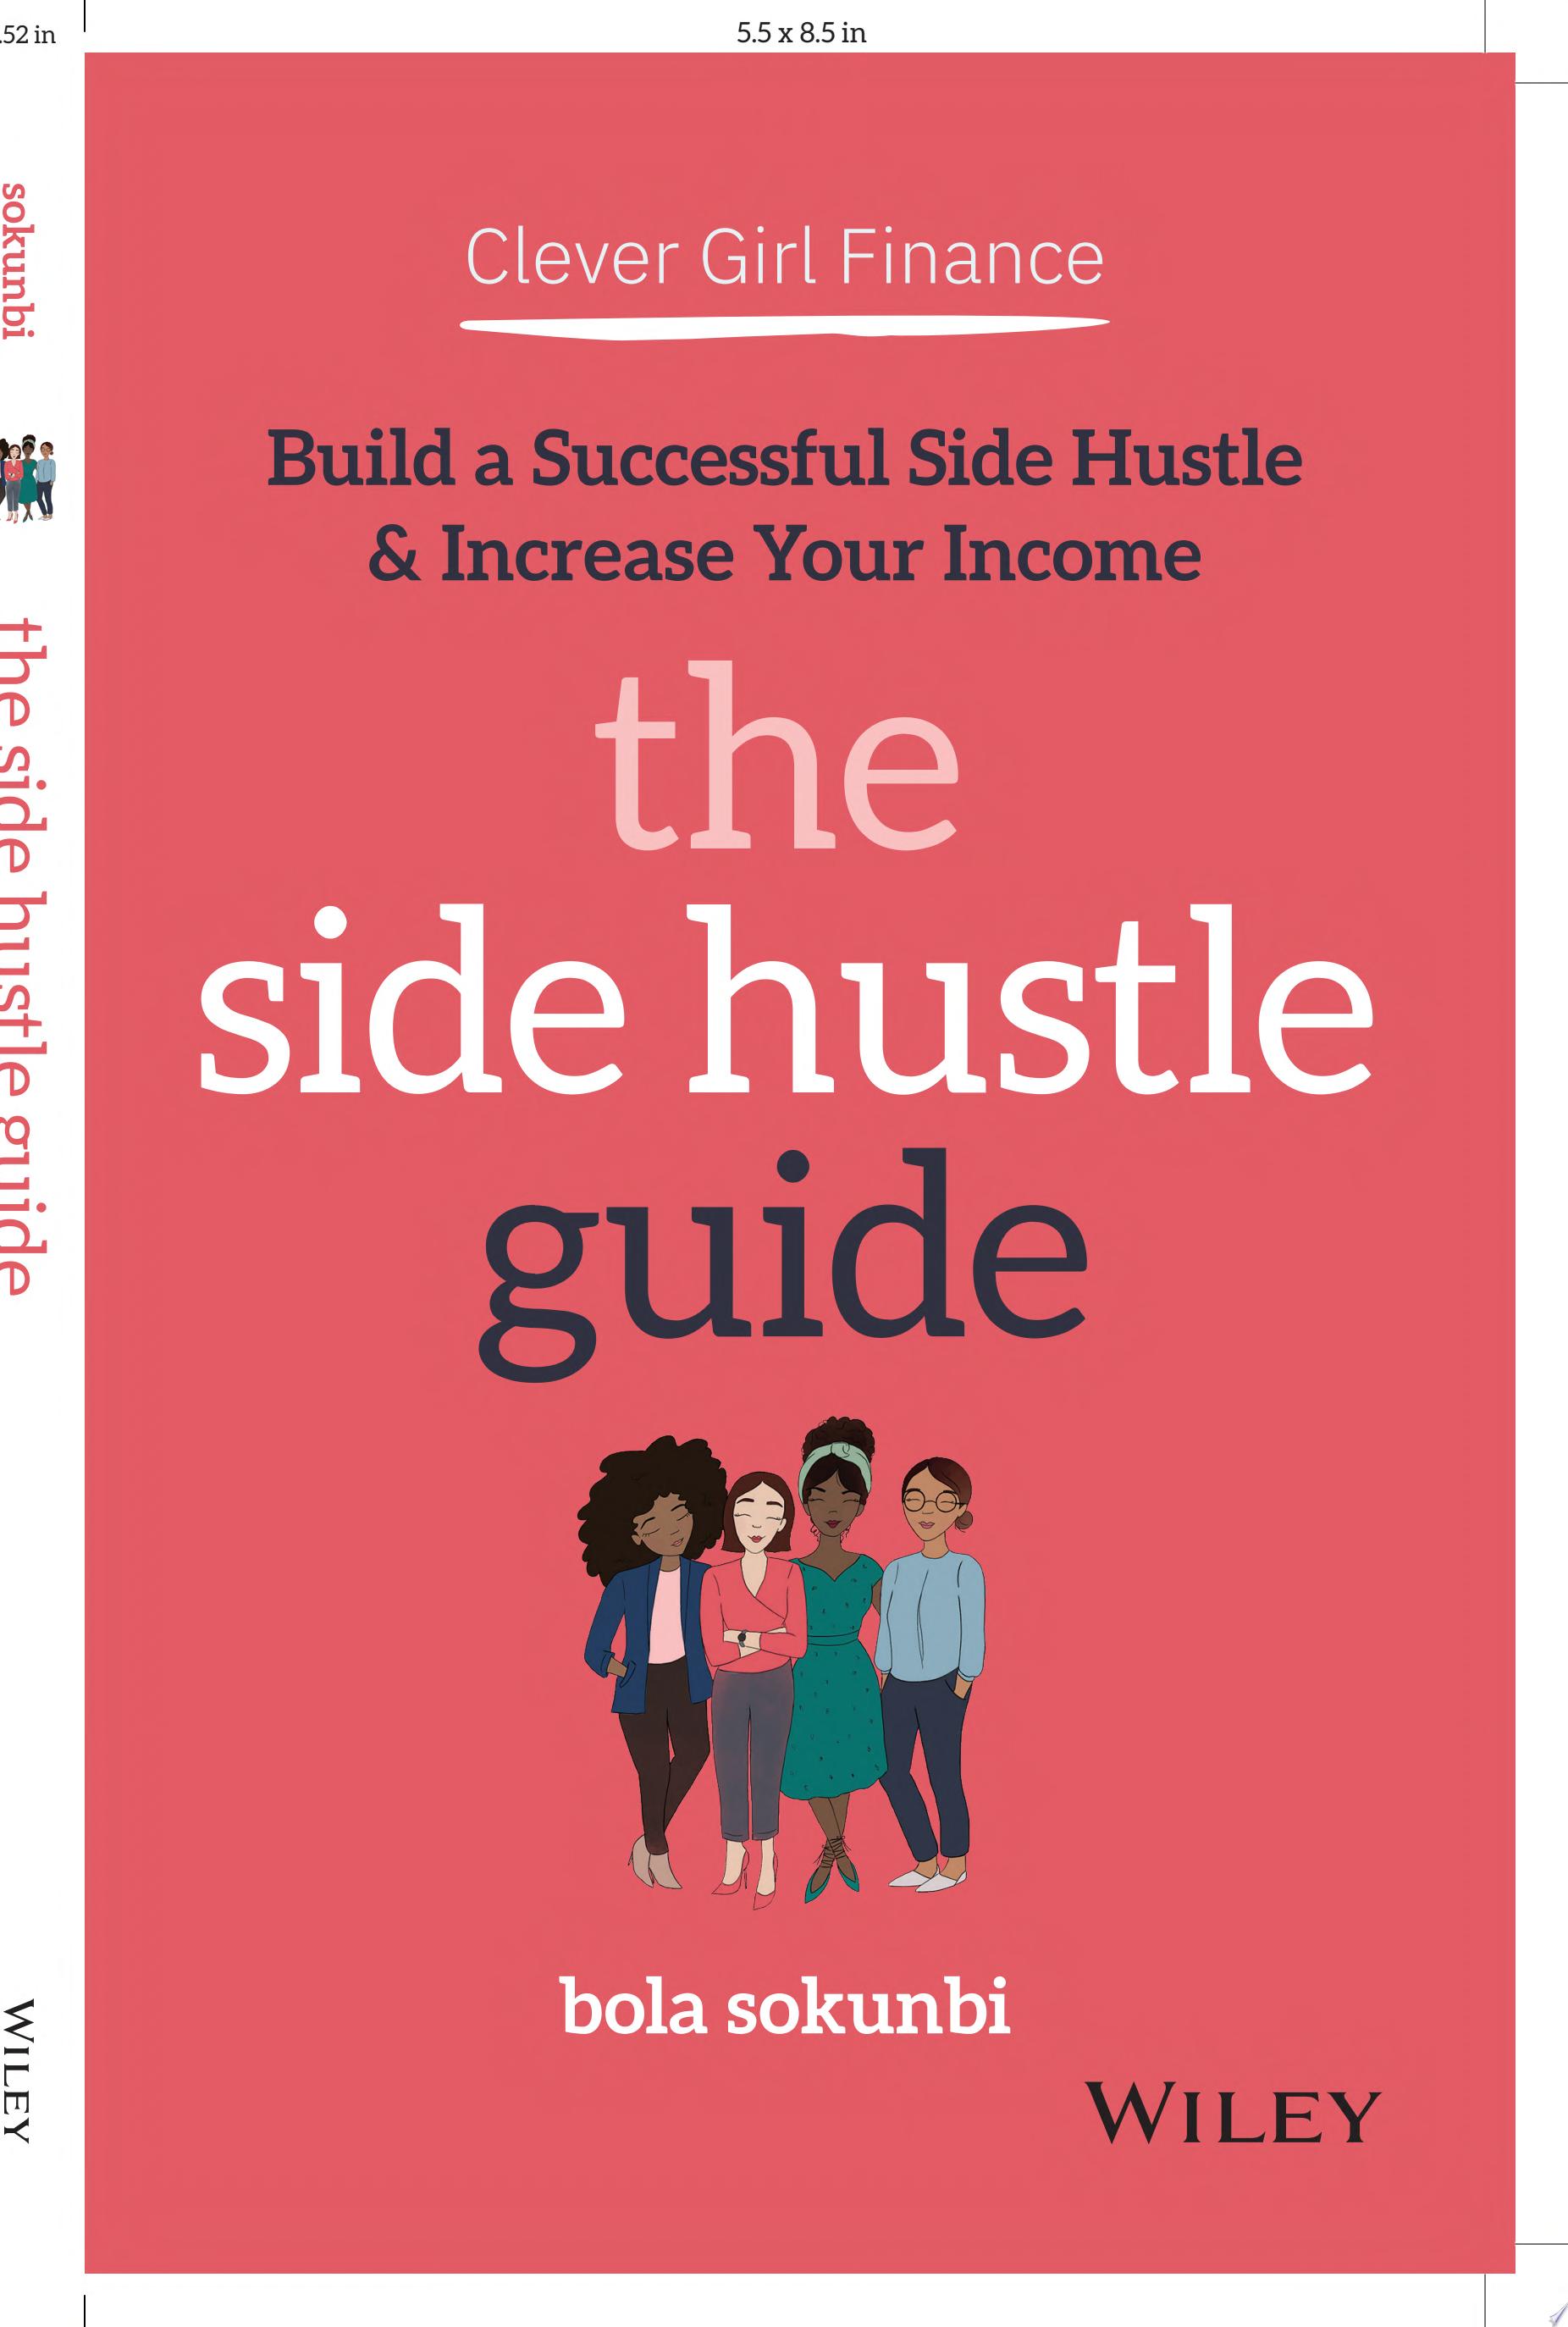 Image for "Clever Girl Finance: The Side Hustle Guide"